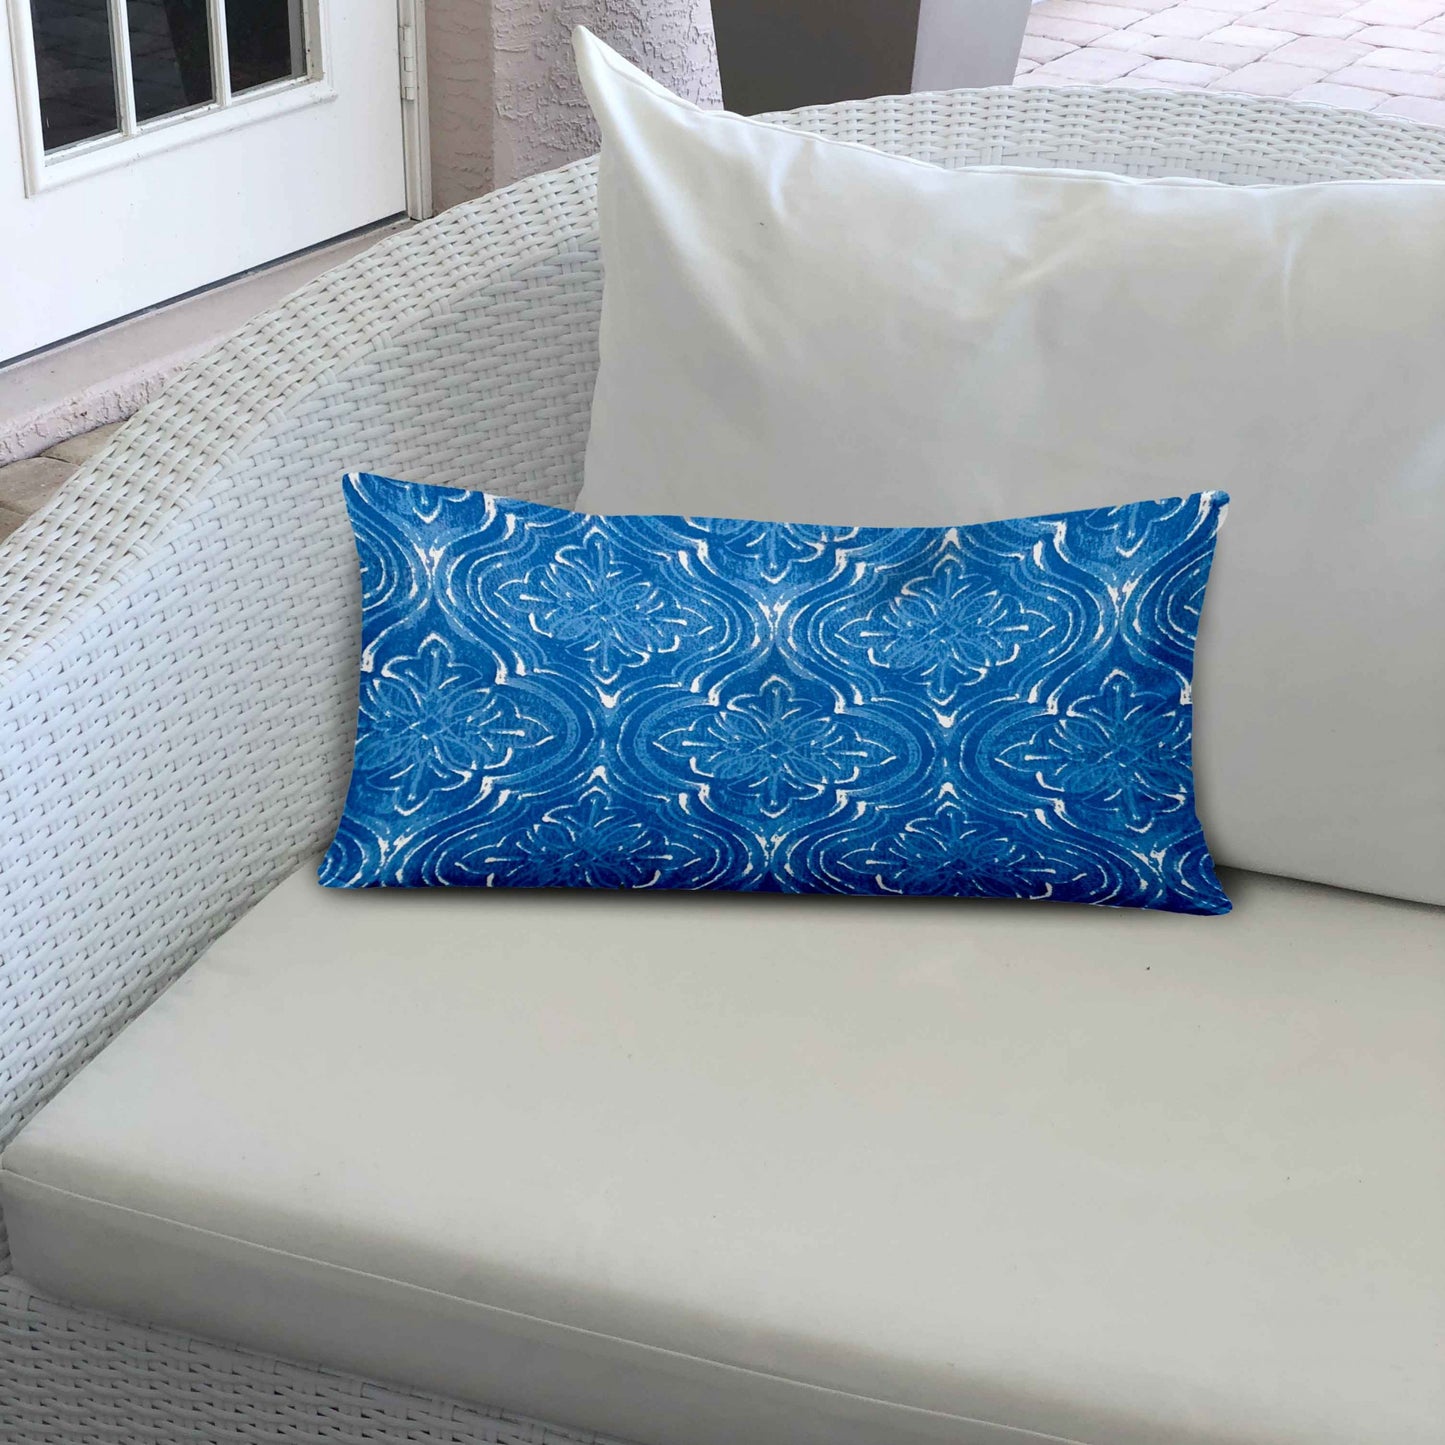 24" X 36" Blue And White Enveloped Ikat Lumbar Indoor Outdoor Pillow Cover